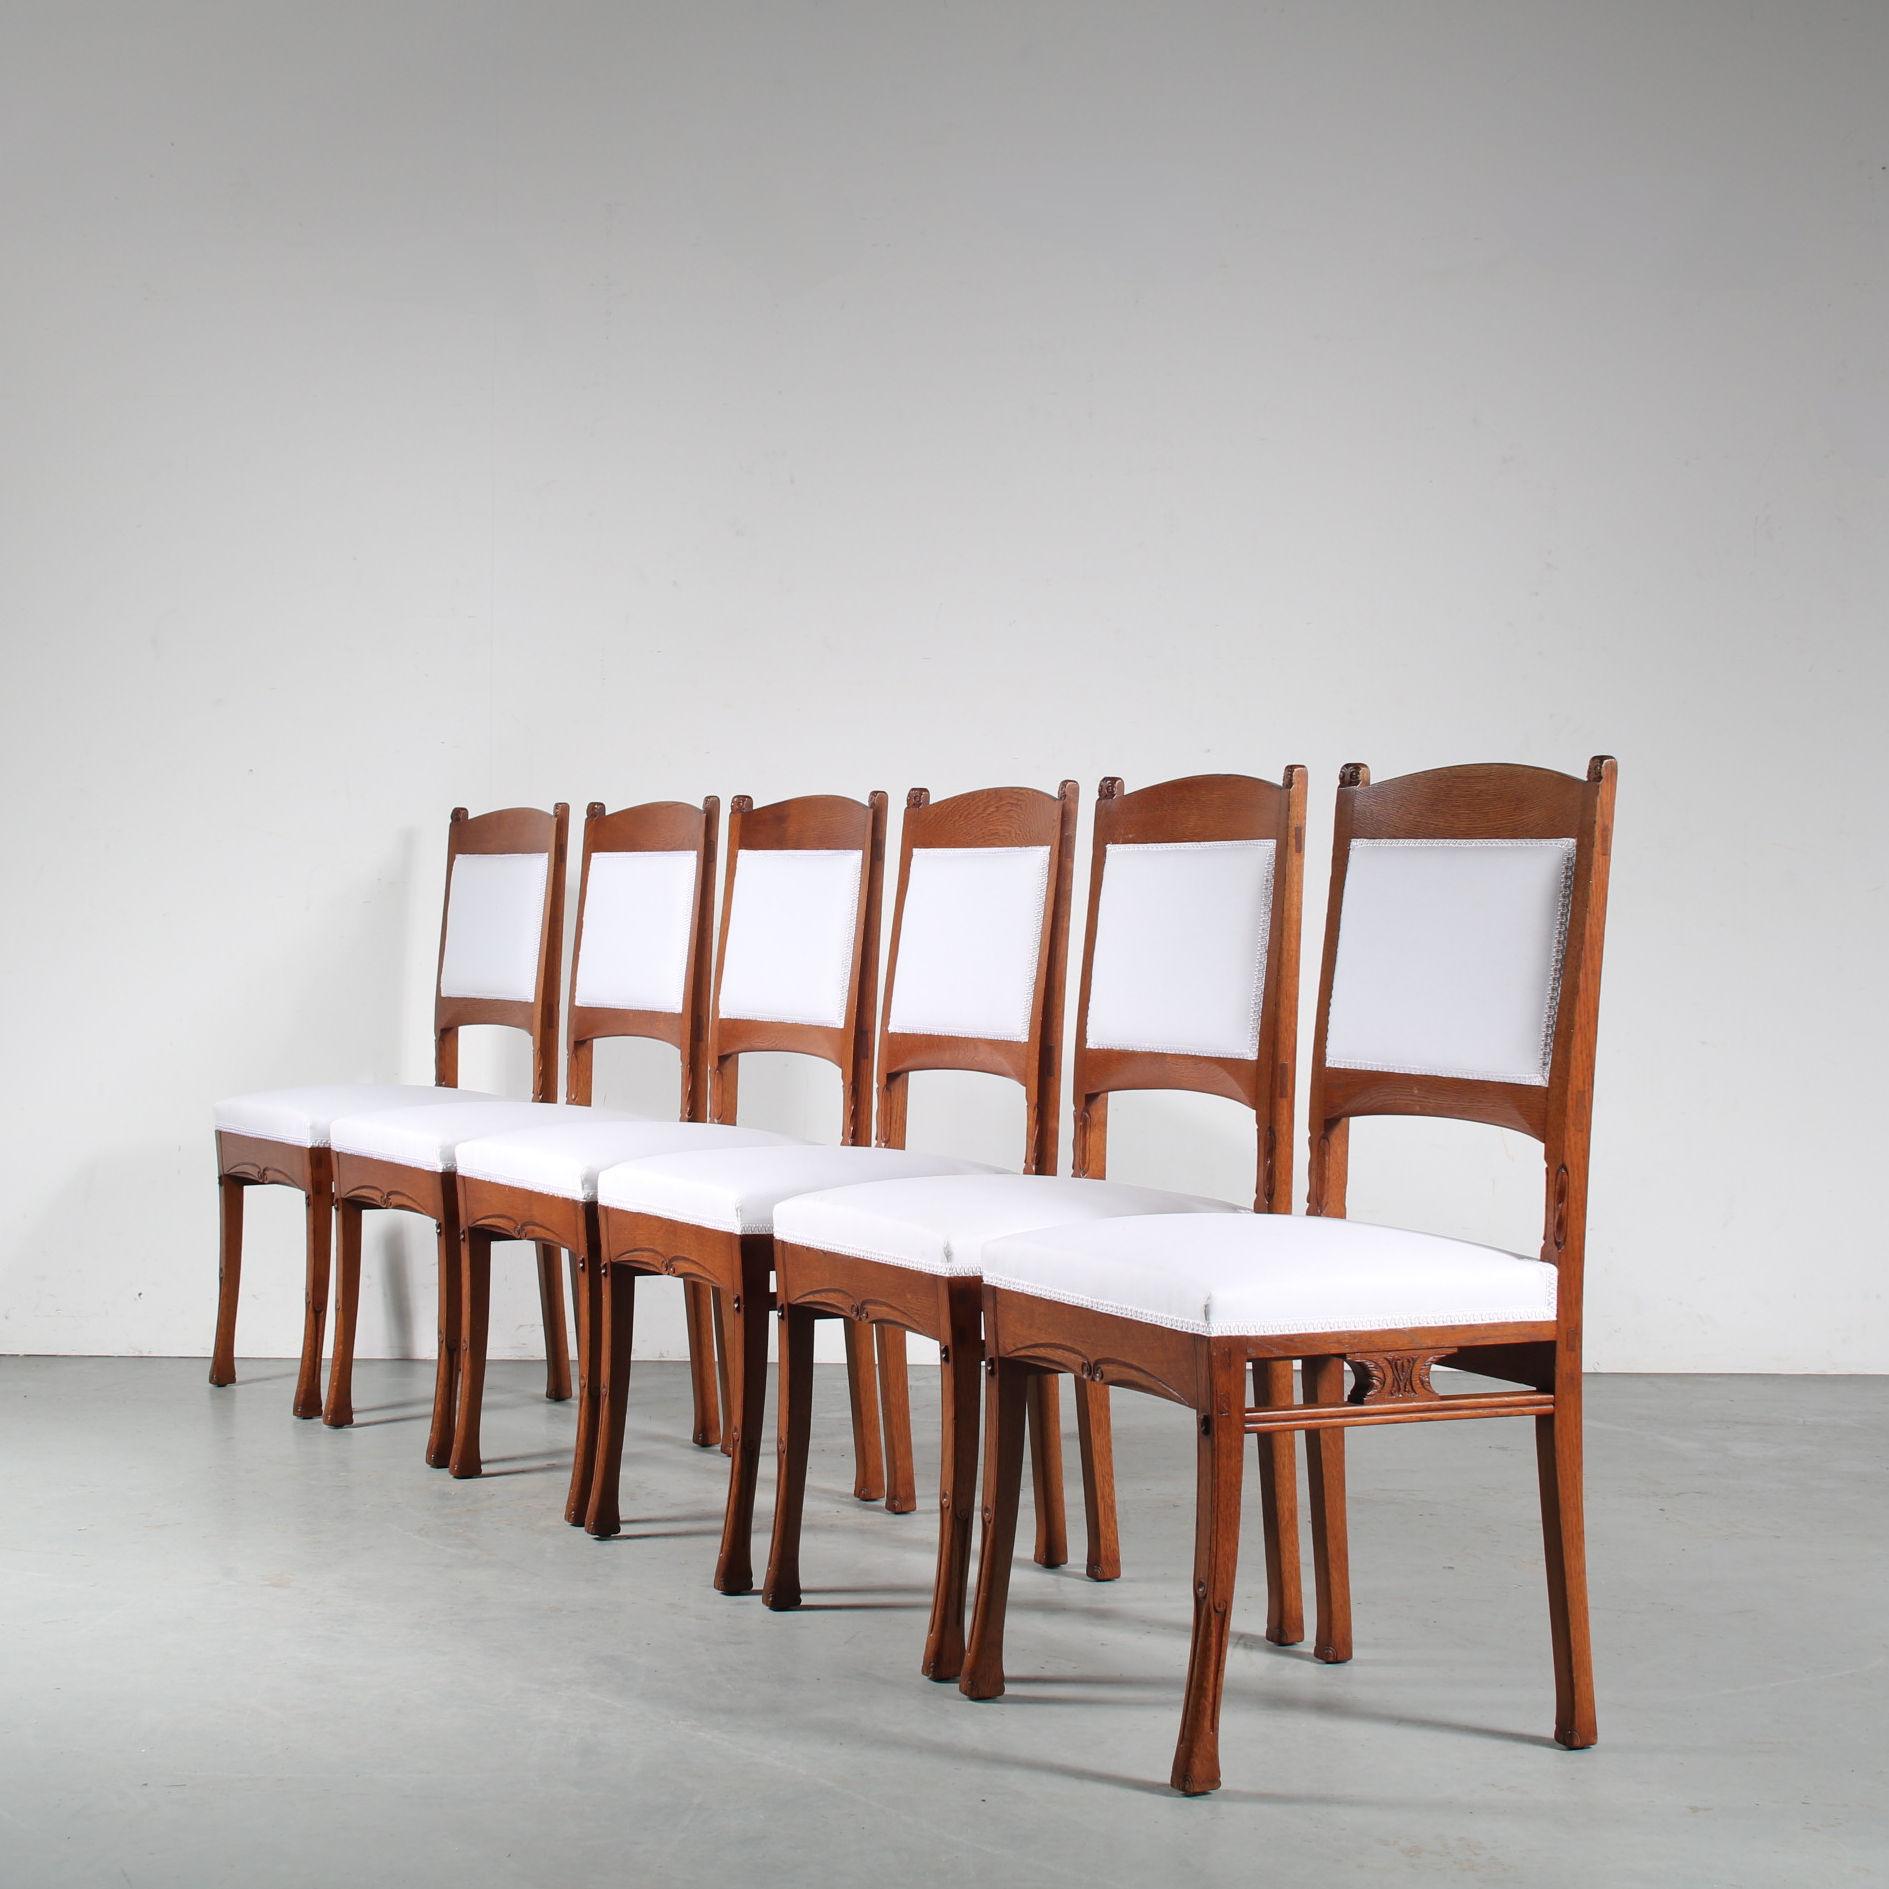 A beautiful set of dining chairs designed by Gerrit Willem Dijsselhof, manufactured by Van Wisselingh in Amsterdam, the Netherlands around 1900.

Made of high quality oak wood in a beautiful warm brown colour, these eye-catching pieces have an